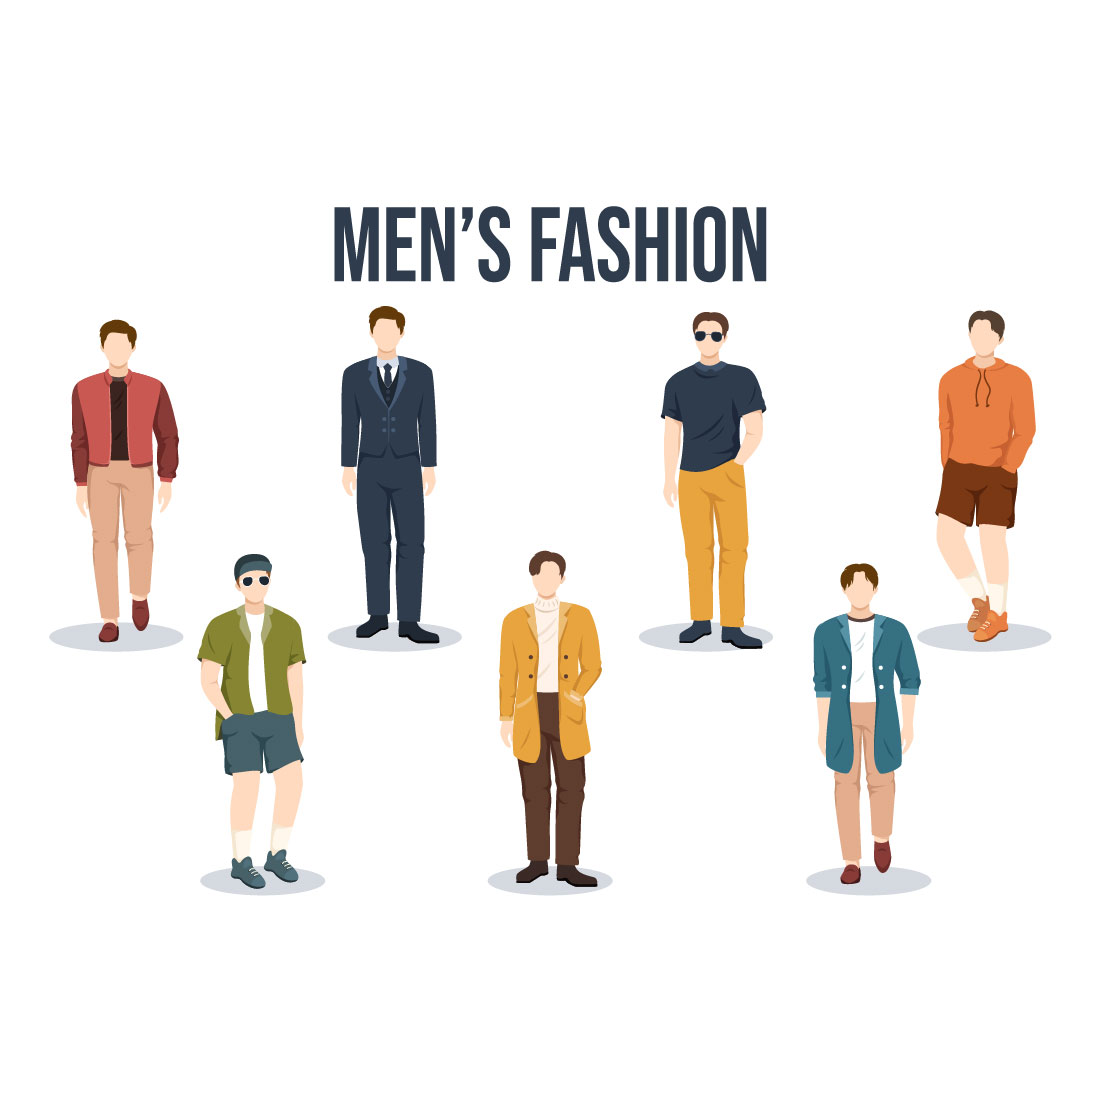 Gorgeous image with men in fashionable clothes.